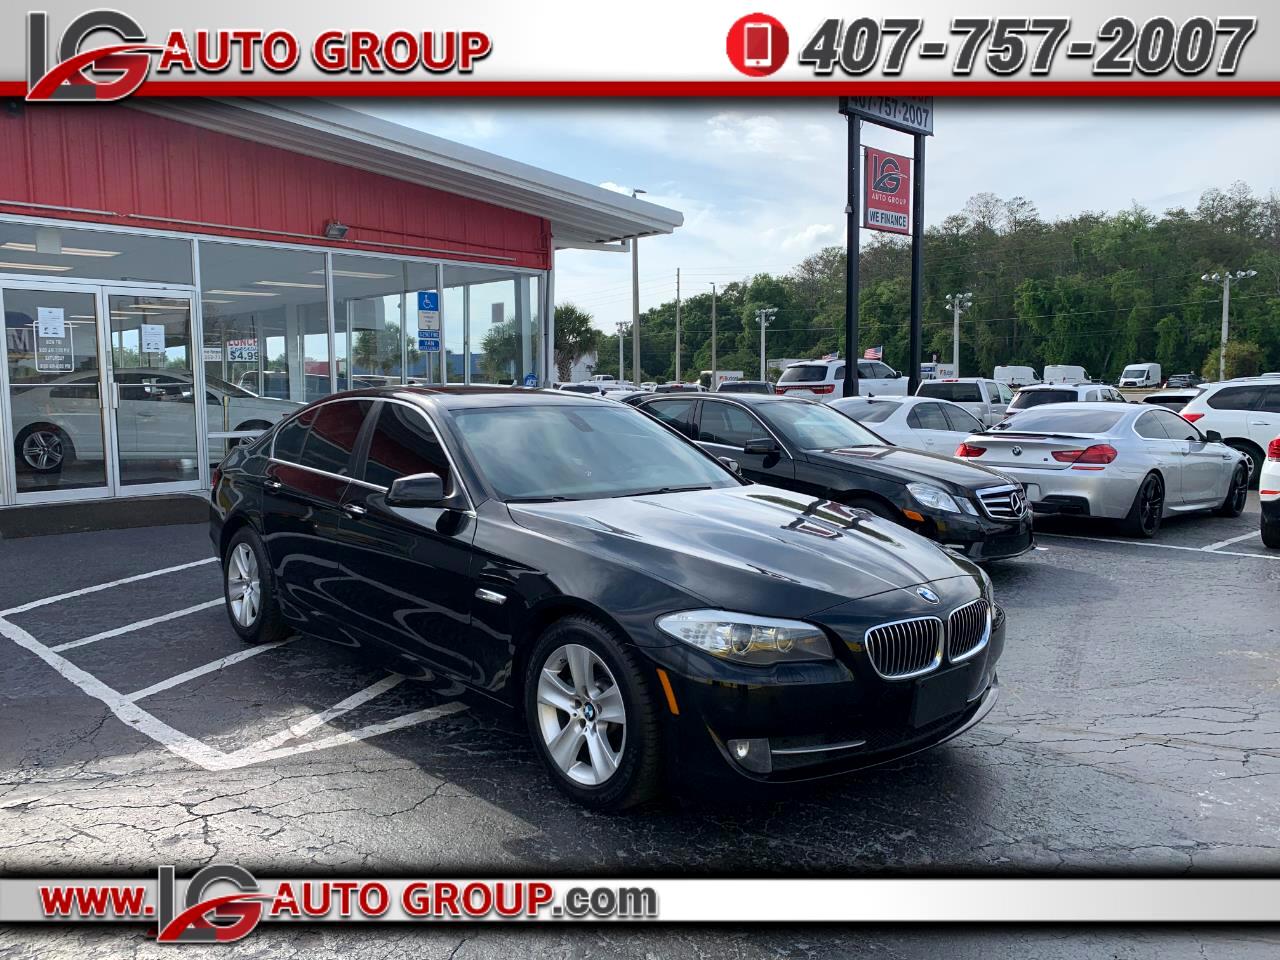 Used 11 Bmw 5 Series 528i For Sale In Orlando Fl Lg Auto Group